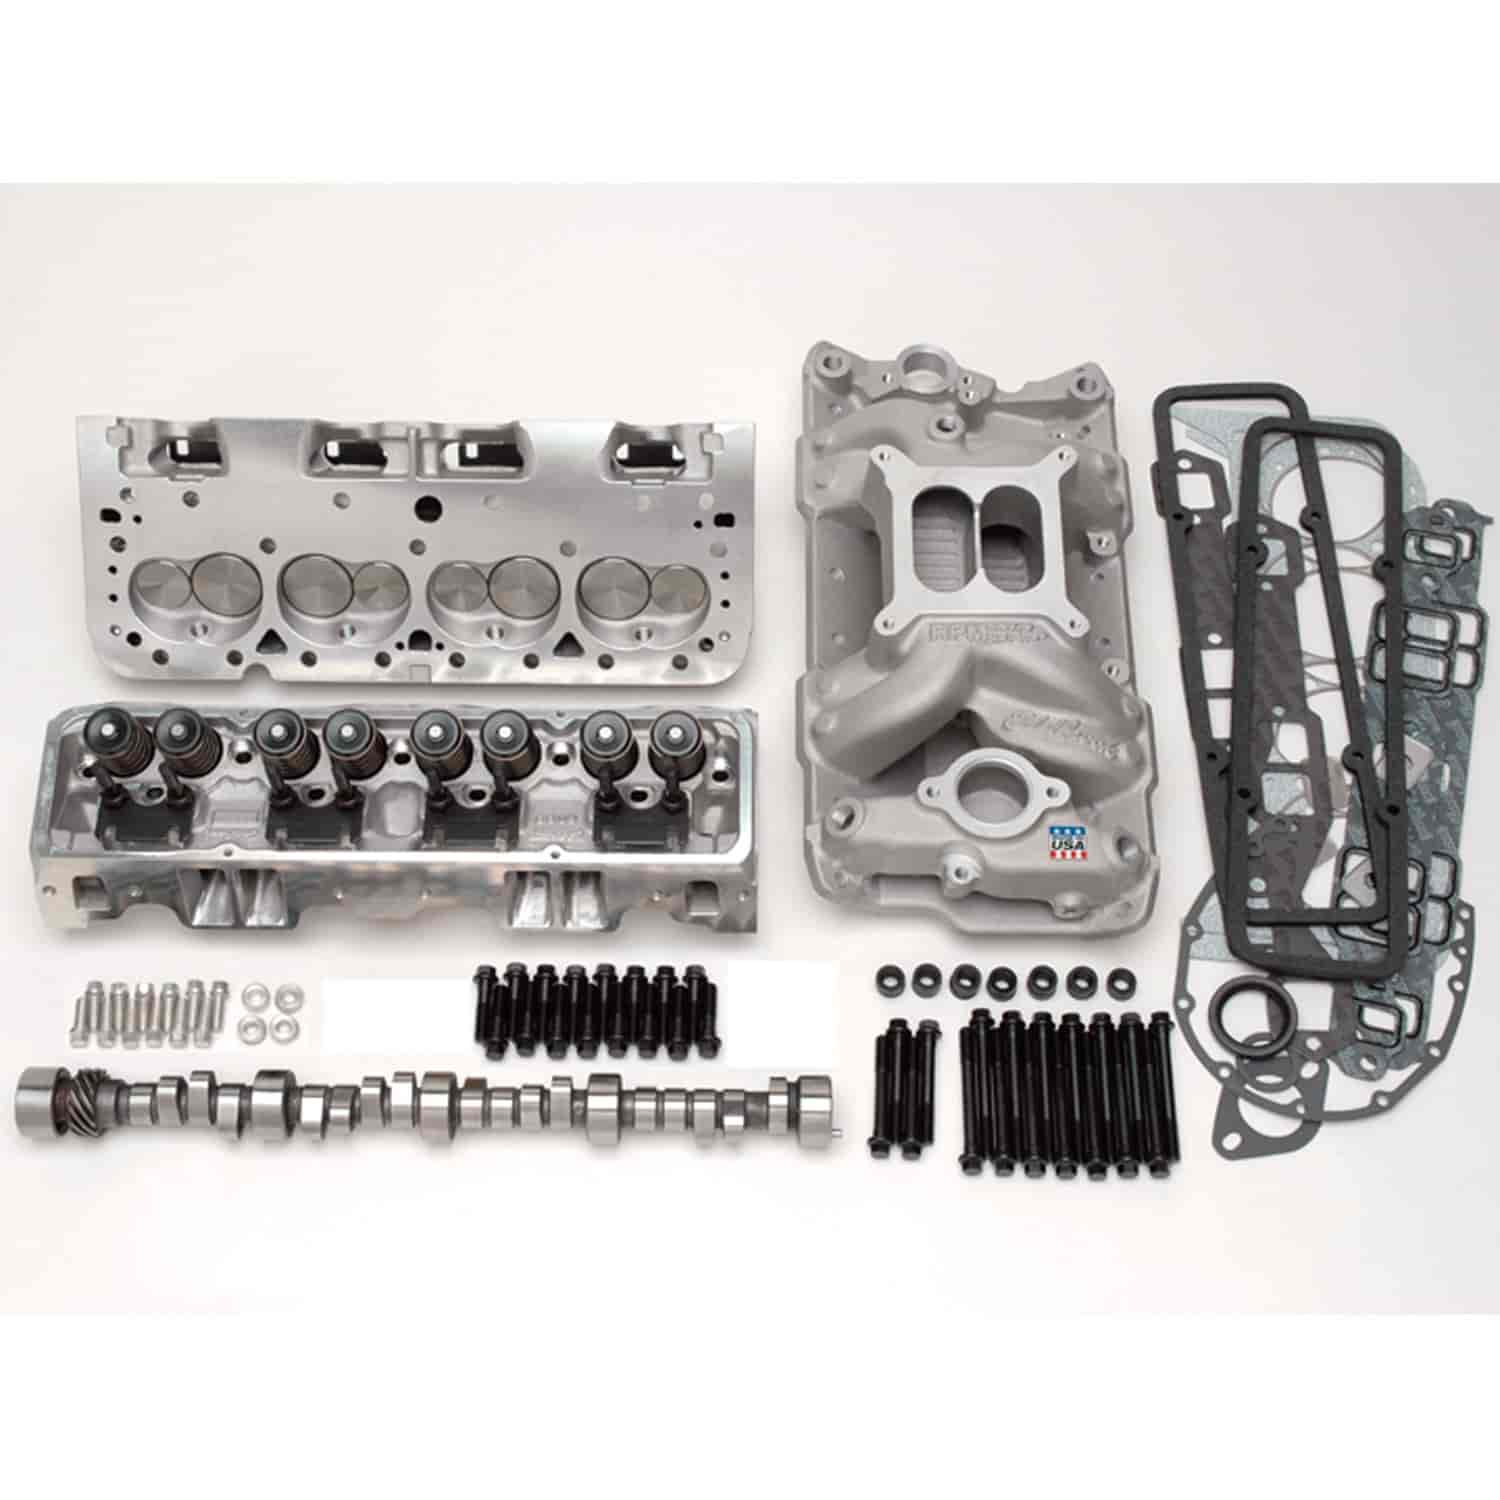 RPM Power Package Kit for 1957-1986 Small Block